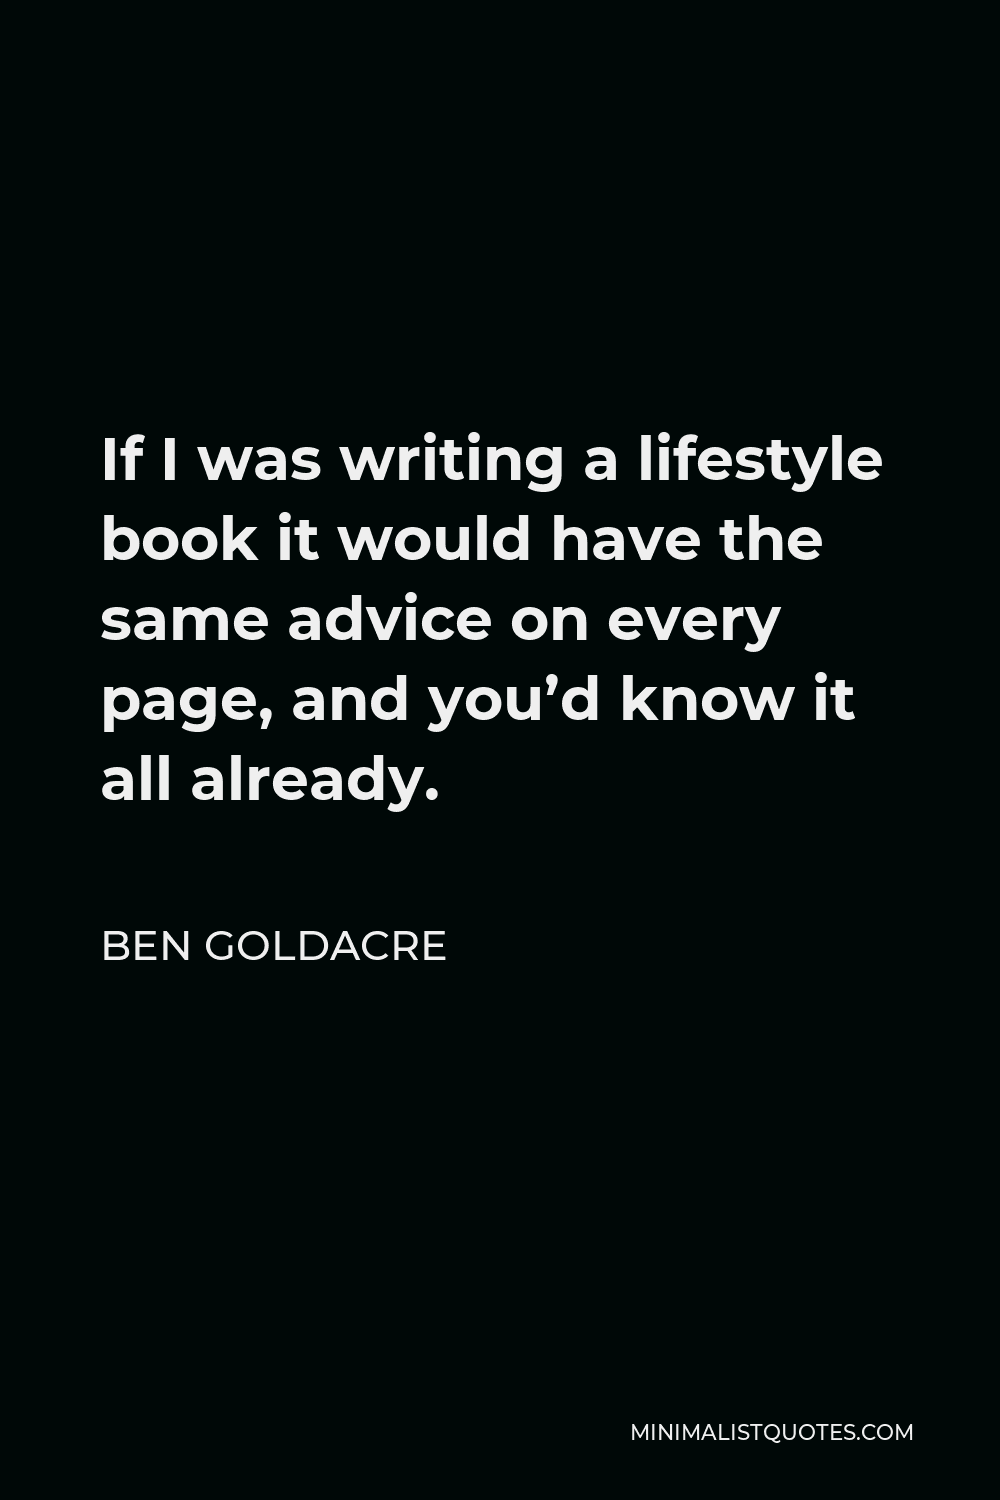 Ben Goldacre Quote - If I was writing a lifestyle book it would have the same advice on every page, and you’d know it all already.